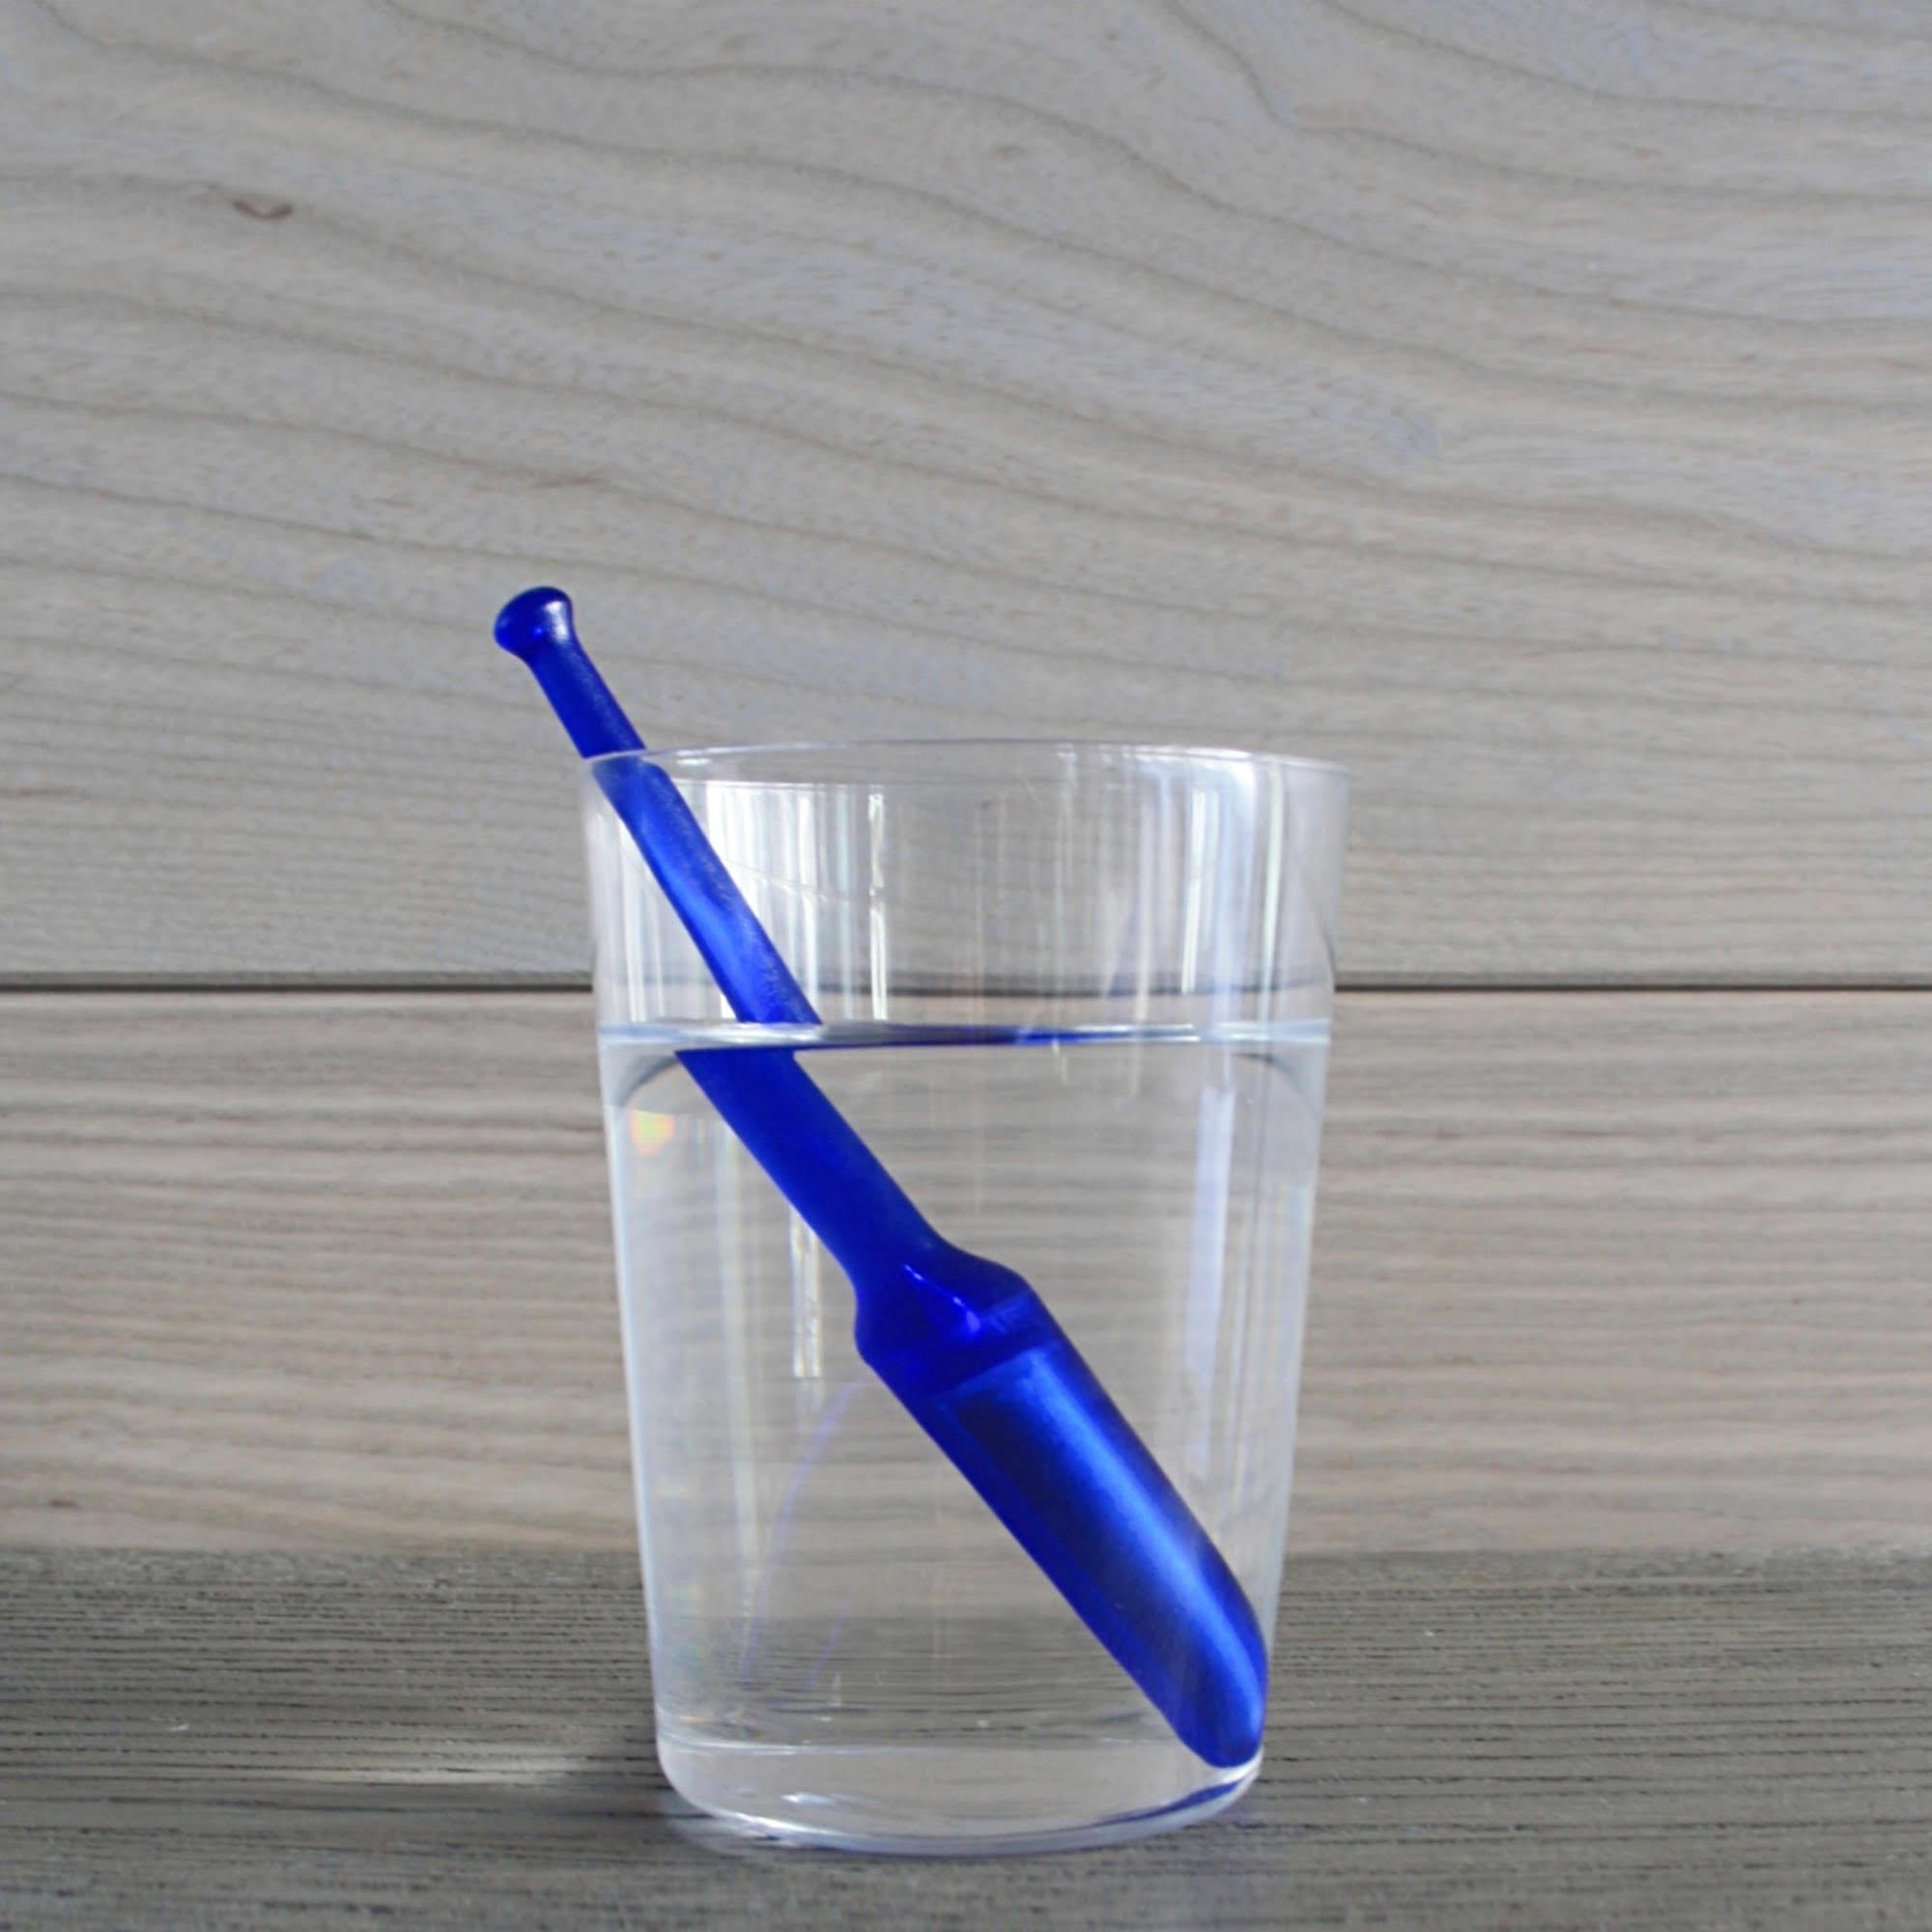 24/7 StirWand blue stirwand in glass filled with water, on wood surface